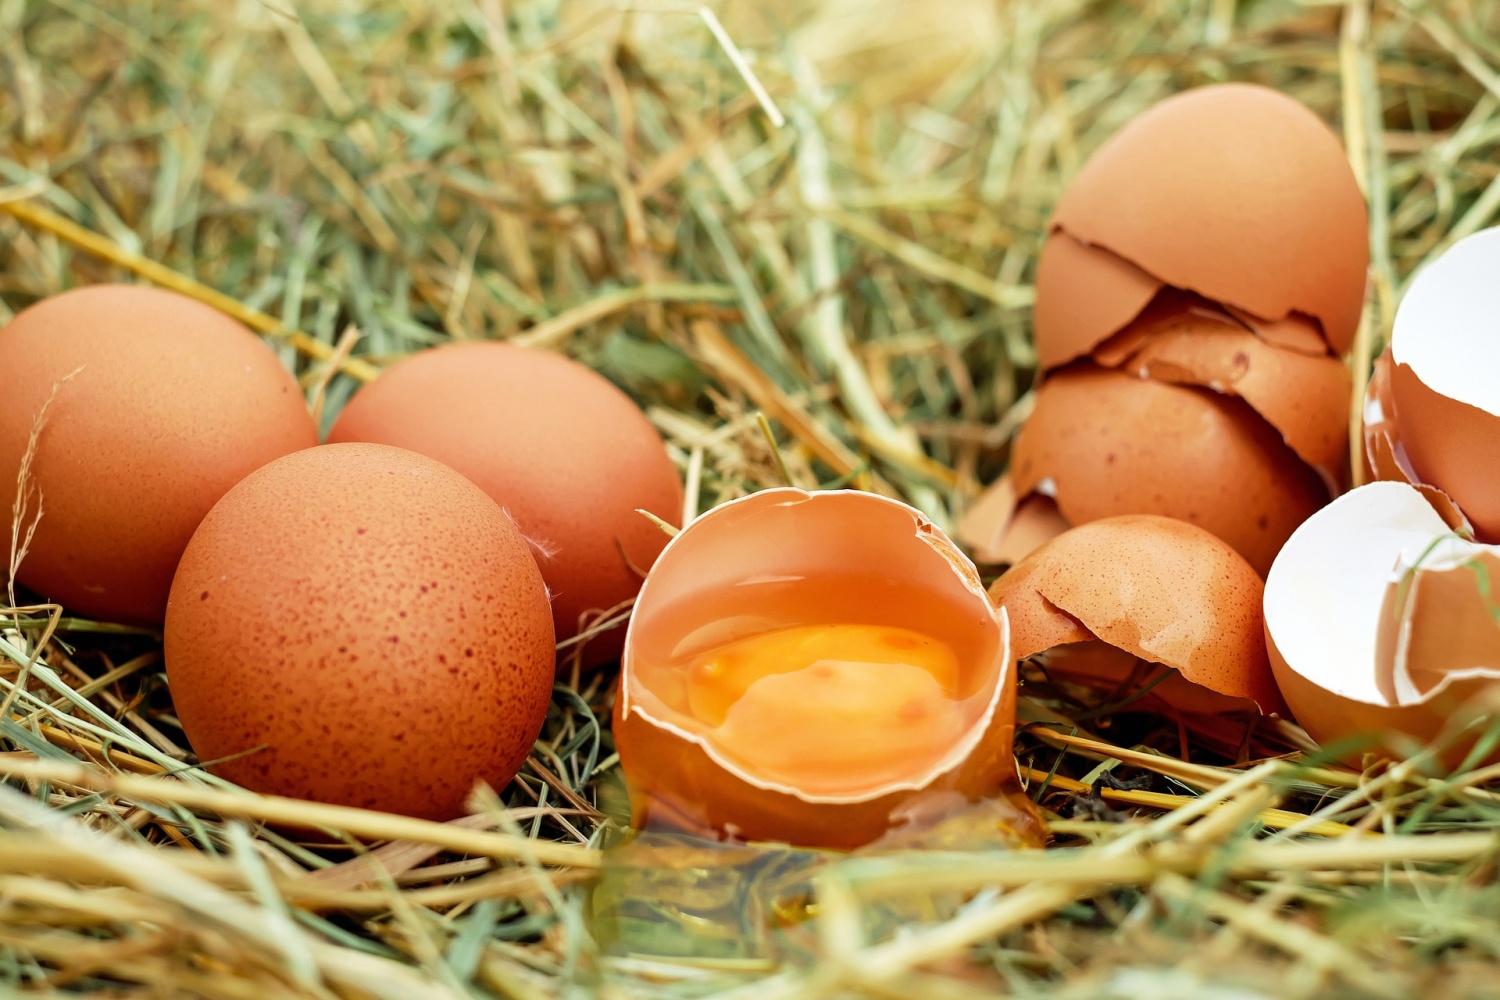 Study’s Amazing Discovery: Chicken Eggshells Can Act as Electrodes to Power Batteries